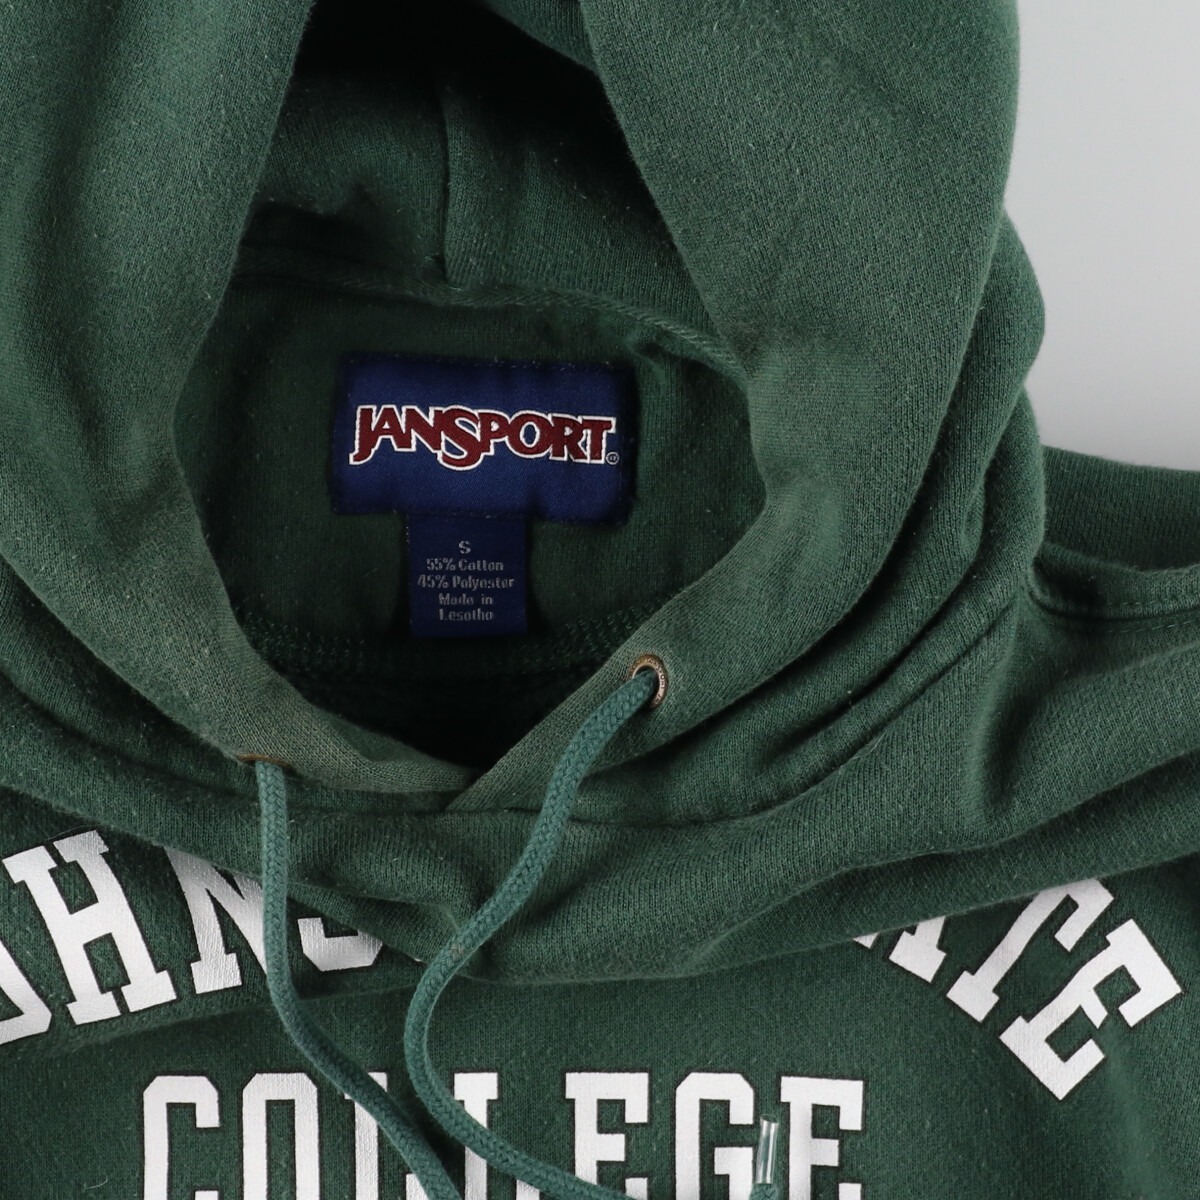  old clothes Jean sport JANSPORT college sweat pull over Parker men's S /eaa366487